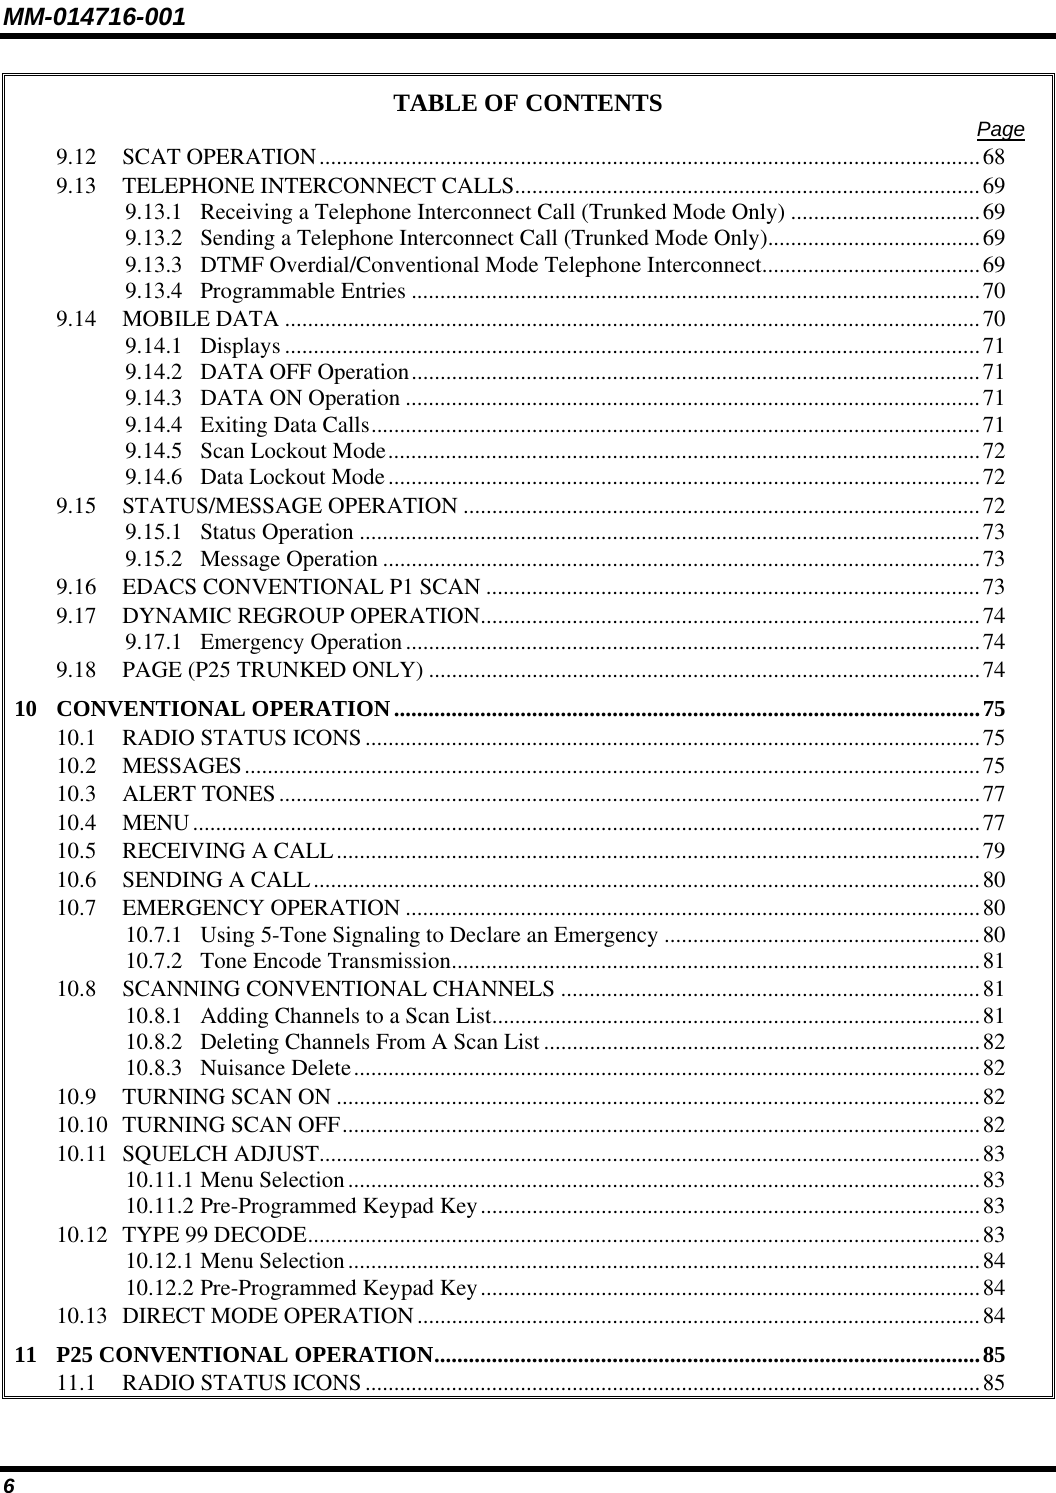 MM-014716-001 6 TABLE OF CONTENTS  Page 9.12 SCAT OPERATION...................................................................................................................68 9.13 TELEPHONE INTERCONNECT CALLS.................................................................................69 9.13.1 Receiving a Telephone Interconnect Call (Trunked Mode Only) .................................69 9.13.2 Sending a Telephone Interconnect Call (Trunked Mode Only).....................................69 9.13.3 DTMF Overdial/Conventional Mode Telephone Interconnect......................................69 9.13.4 Programmable Entries ...................................................................................................70 9.14 MOBILE DATA .........................................................................................................................70 9.14.1 Displays .........................................................................................................................71 9.14.2 DATA OFF Operation...................................................................................................71 9.14.3 DATA ON Operation ....................................................................................................71 9.14.4 Exiting Data Calls..........................................................................................................71 9.14.5 Scan Lockout Mode.......................................................................................................72 9.14.6 Data Lockout Mode.......................................................................................................72 9.15 STATUS/MESSAGE OPERATION ..........................................................................................72 9.15.1 Status Operation ............................................................................................................73 9.15.2 Message Operation ........................................................................................................73 9.16 EDACS CONVENTIONAL P1 SCAN ......................................................................................73 9.17 DYNAMIC REGROUP OPERATION.......................................................................................74 9.17.1 Emergency Operation....................................................................................................74 9.18 PAGE (P25 TRUNKED ONLY) ................................................................................................74 10 CONVENTIONAL OPERATION......................................................................................................75 10.1 RADIO STATUS ICONS...........................................................................................................75 10.2 MESSAGES................................................................................................................................75 10.3 ALERT TONES..........................................................................................................................77 10.4 MENU.........................................................................................................................................77 10.5 RECEIVING A CALL................................................................................................................79 10.6 SENDING A CALL....................................................................................................................80 10.7 EMERGENCY OPERATION ....................................................................................................80 10.7.1 Using 5-Tone Signaling to Declare an Emergency .......................................................80 10.7.2 Tone Encode Transmission............................................................................................81 10.8 SCANNING CONVENTIONAL CHANNELS .........................................................................81 10.8.1 Adding Channels to a Scan List.....................................................................................81 10.8.2 Deleting Channels From A Scan List............................................................................82 10.8.3 Nuisance Delete.............................................................................................................82 10.9 TURNING SCAN ON ................................................................................................................82 10.10 TURNING SCAN OFF...............................................................................................................82 10.11 SQUELCH ADJUST...................................................................................................................83 10.11.1 Menu Selection..............................................................................................................83 10.11.2 Pre-Programmed Keypad Key.......................................................................................83 10.12 TYPE 99 DECODE.....................................................................................................................83 10.12.1 Menu Selection..............................................................................................................84 10.12.2 Pre-Programmed Keypad Key.......................................................................................84 10.13 DIRECT MODE OPERATION..................................................................................................84 11 P25 CONVENTIONAL OPERATION...............................................................................................85 11.1 RADIO STATUS ICONS...........................................................................................................85 